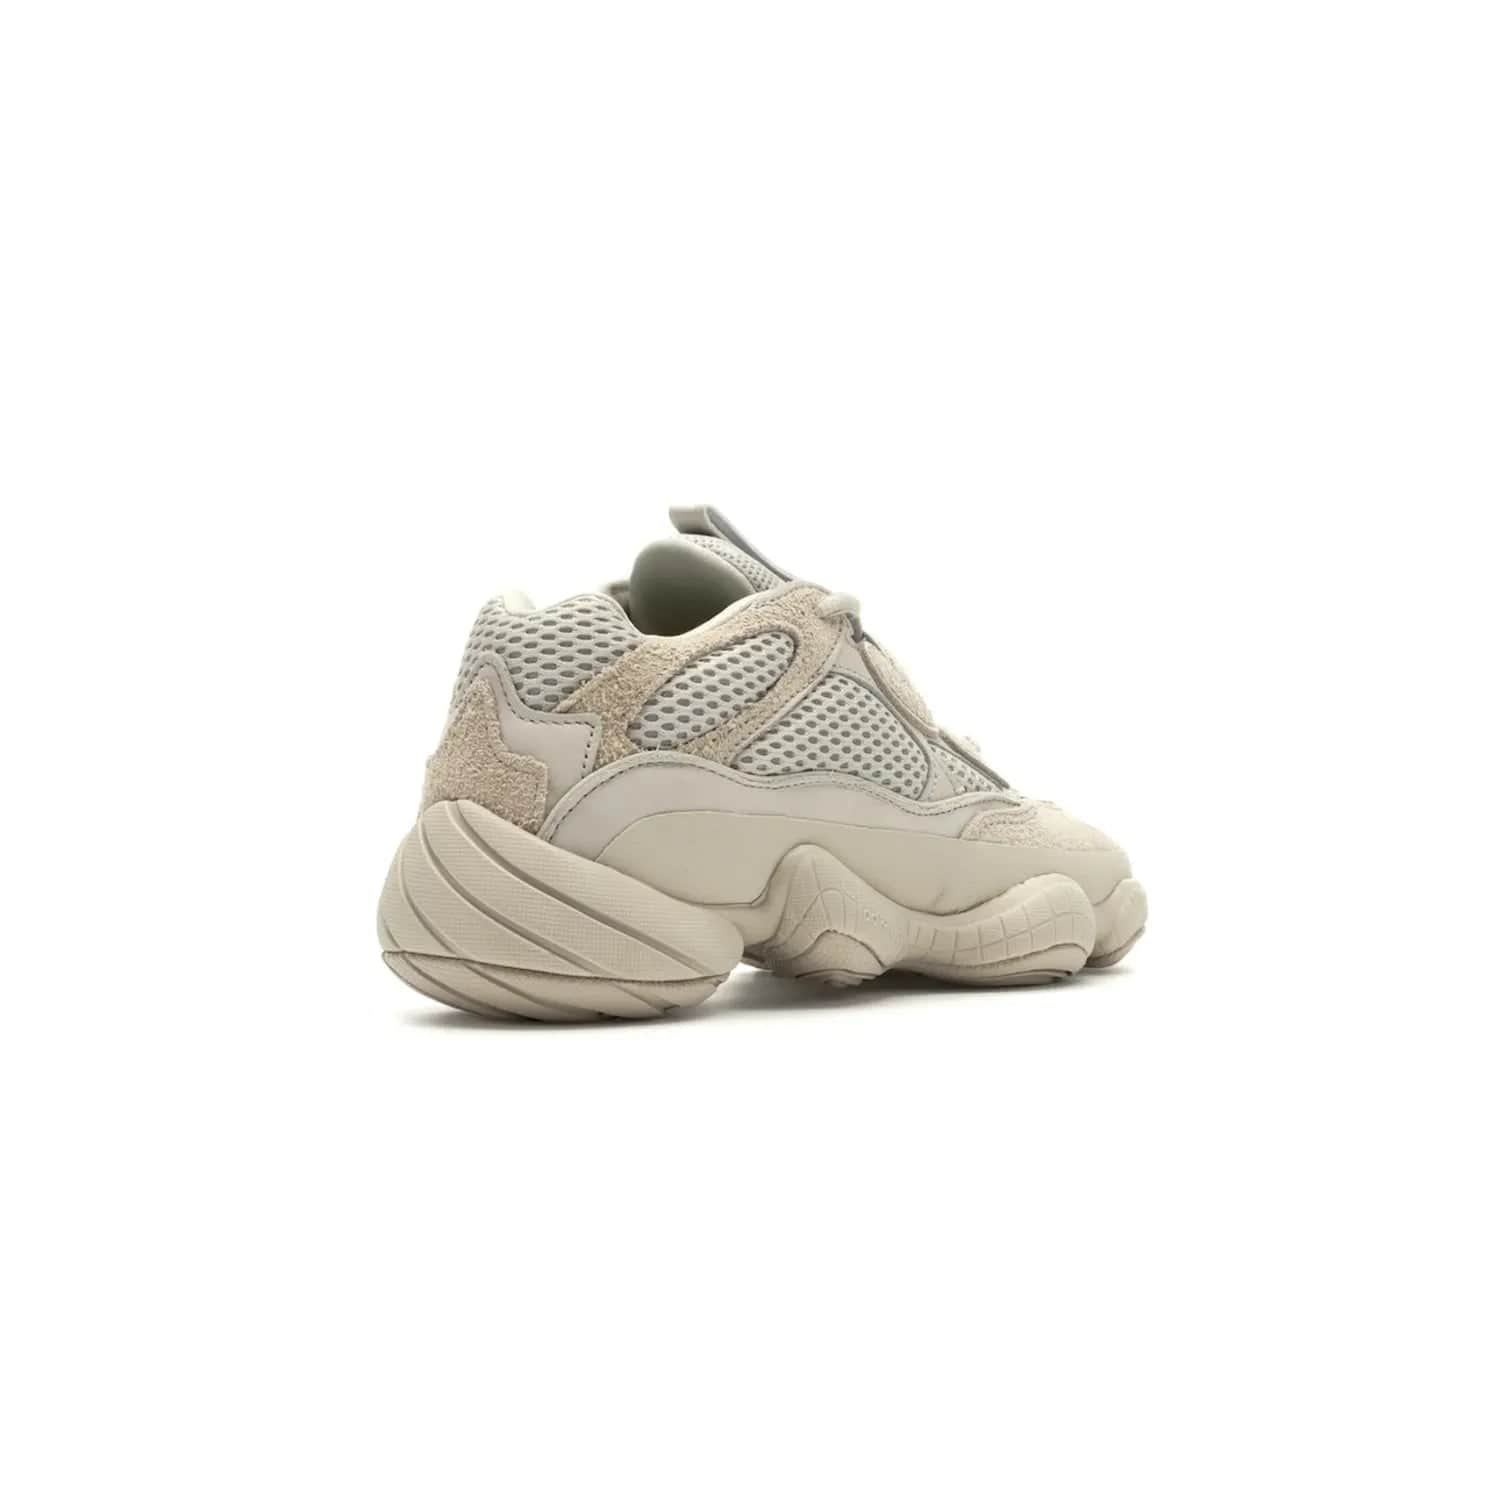 adidas Yeezy 500 Blush - Image 32 - Only at www.BallersClubKickz.com - Step up your sneaker game with the Adidas Yeezy 500 Blush. Monochromatic pale pink palette, hiking-inspired suede/mesh construction, plus adiPRENE sole for comfort and performance. Get the Adidas Yeezy 500 and experience true style and comfort.